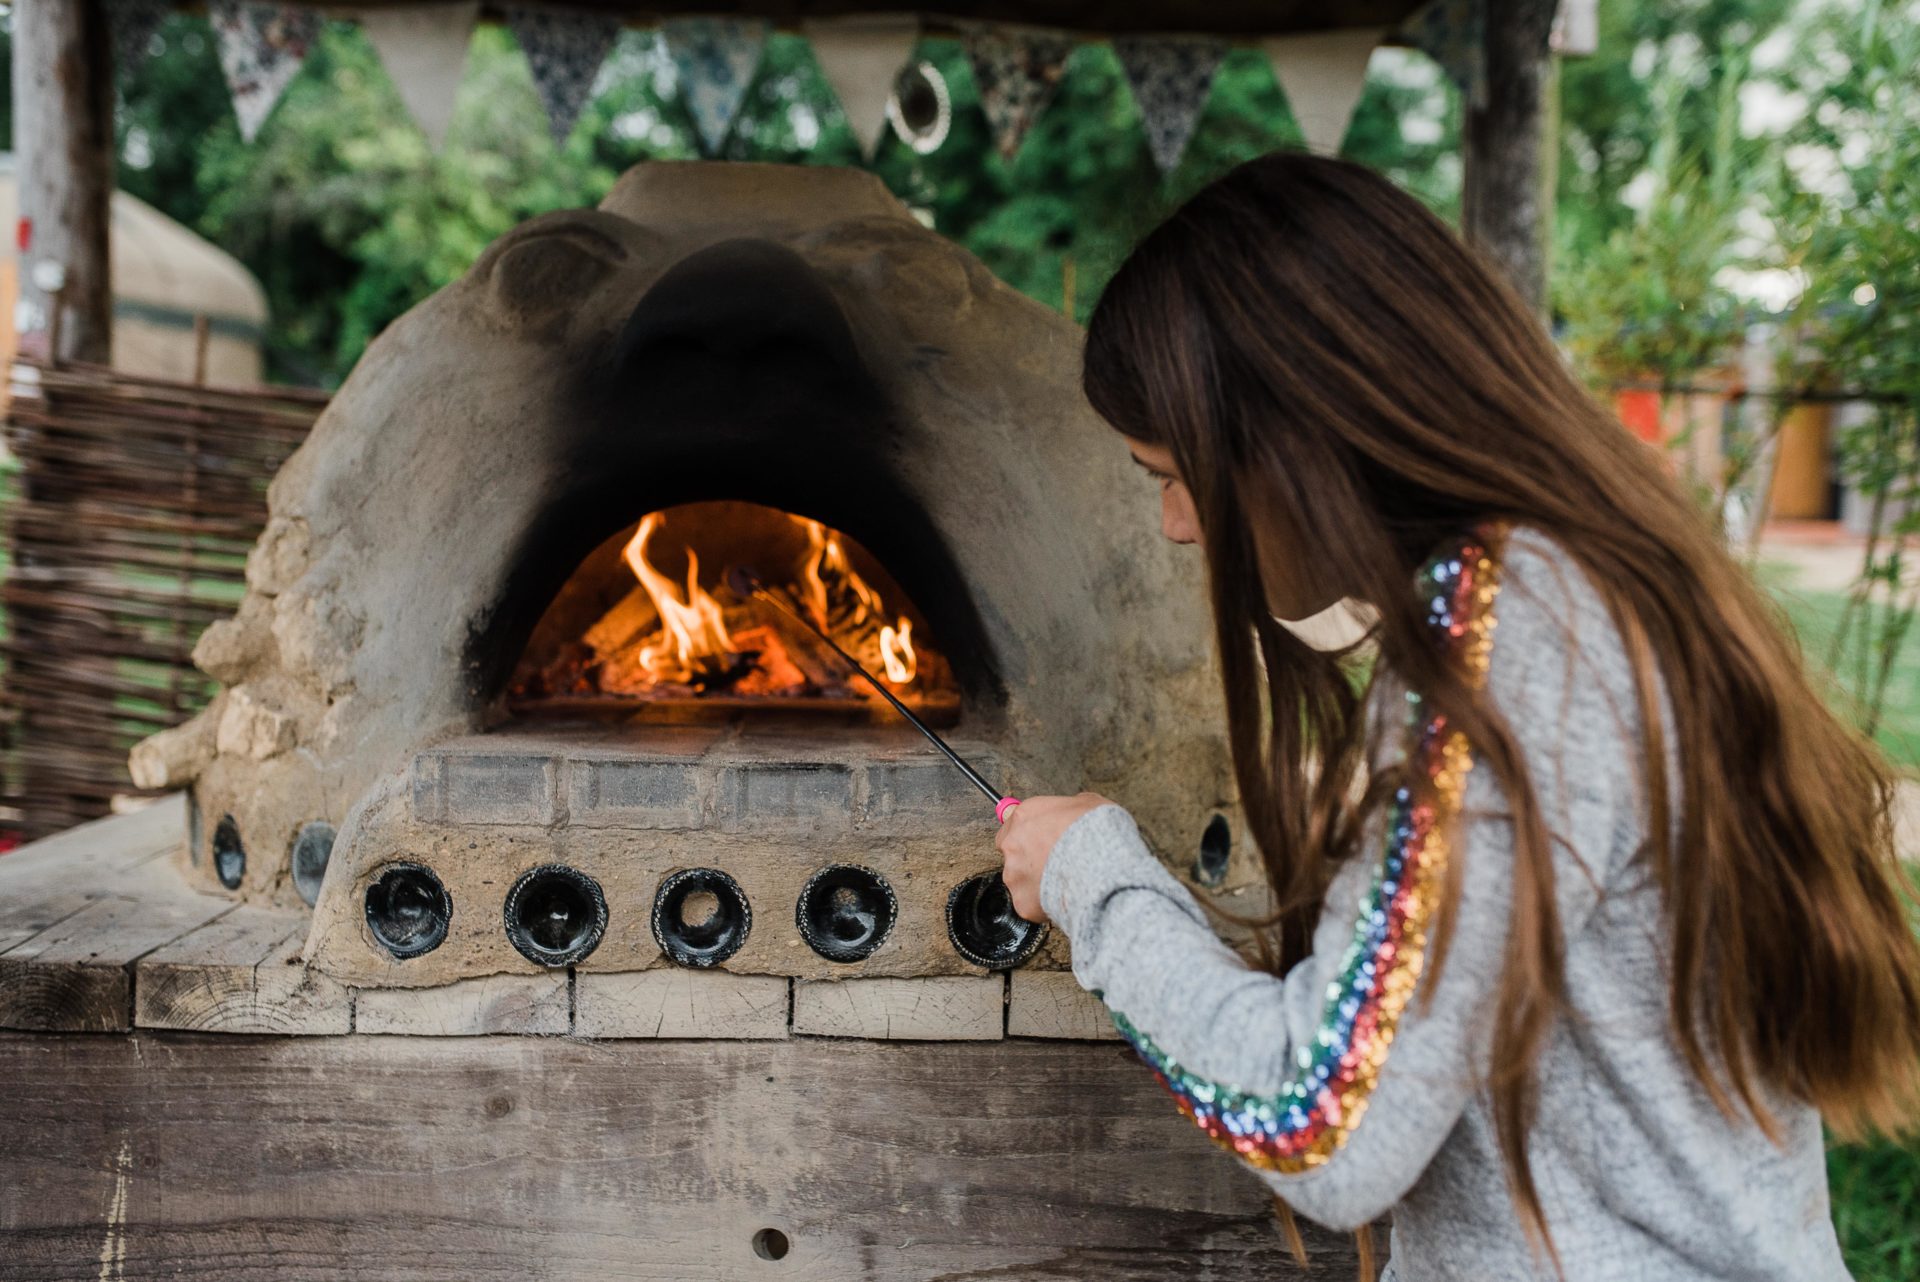 Flames inside the cob oven and girl toasting marshmallows